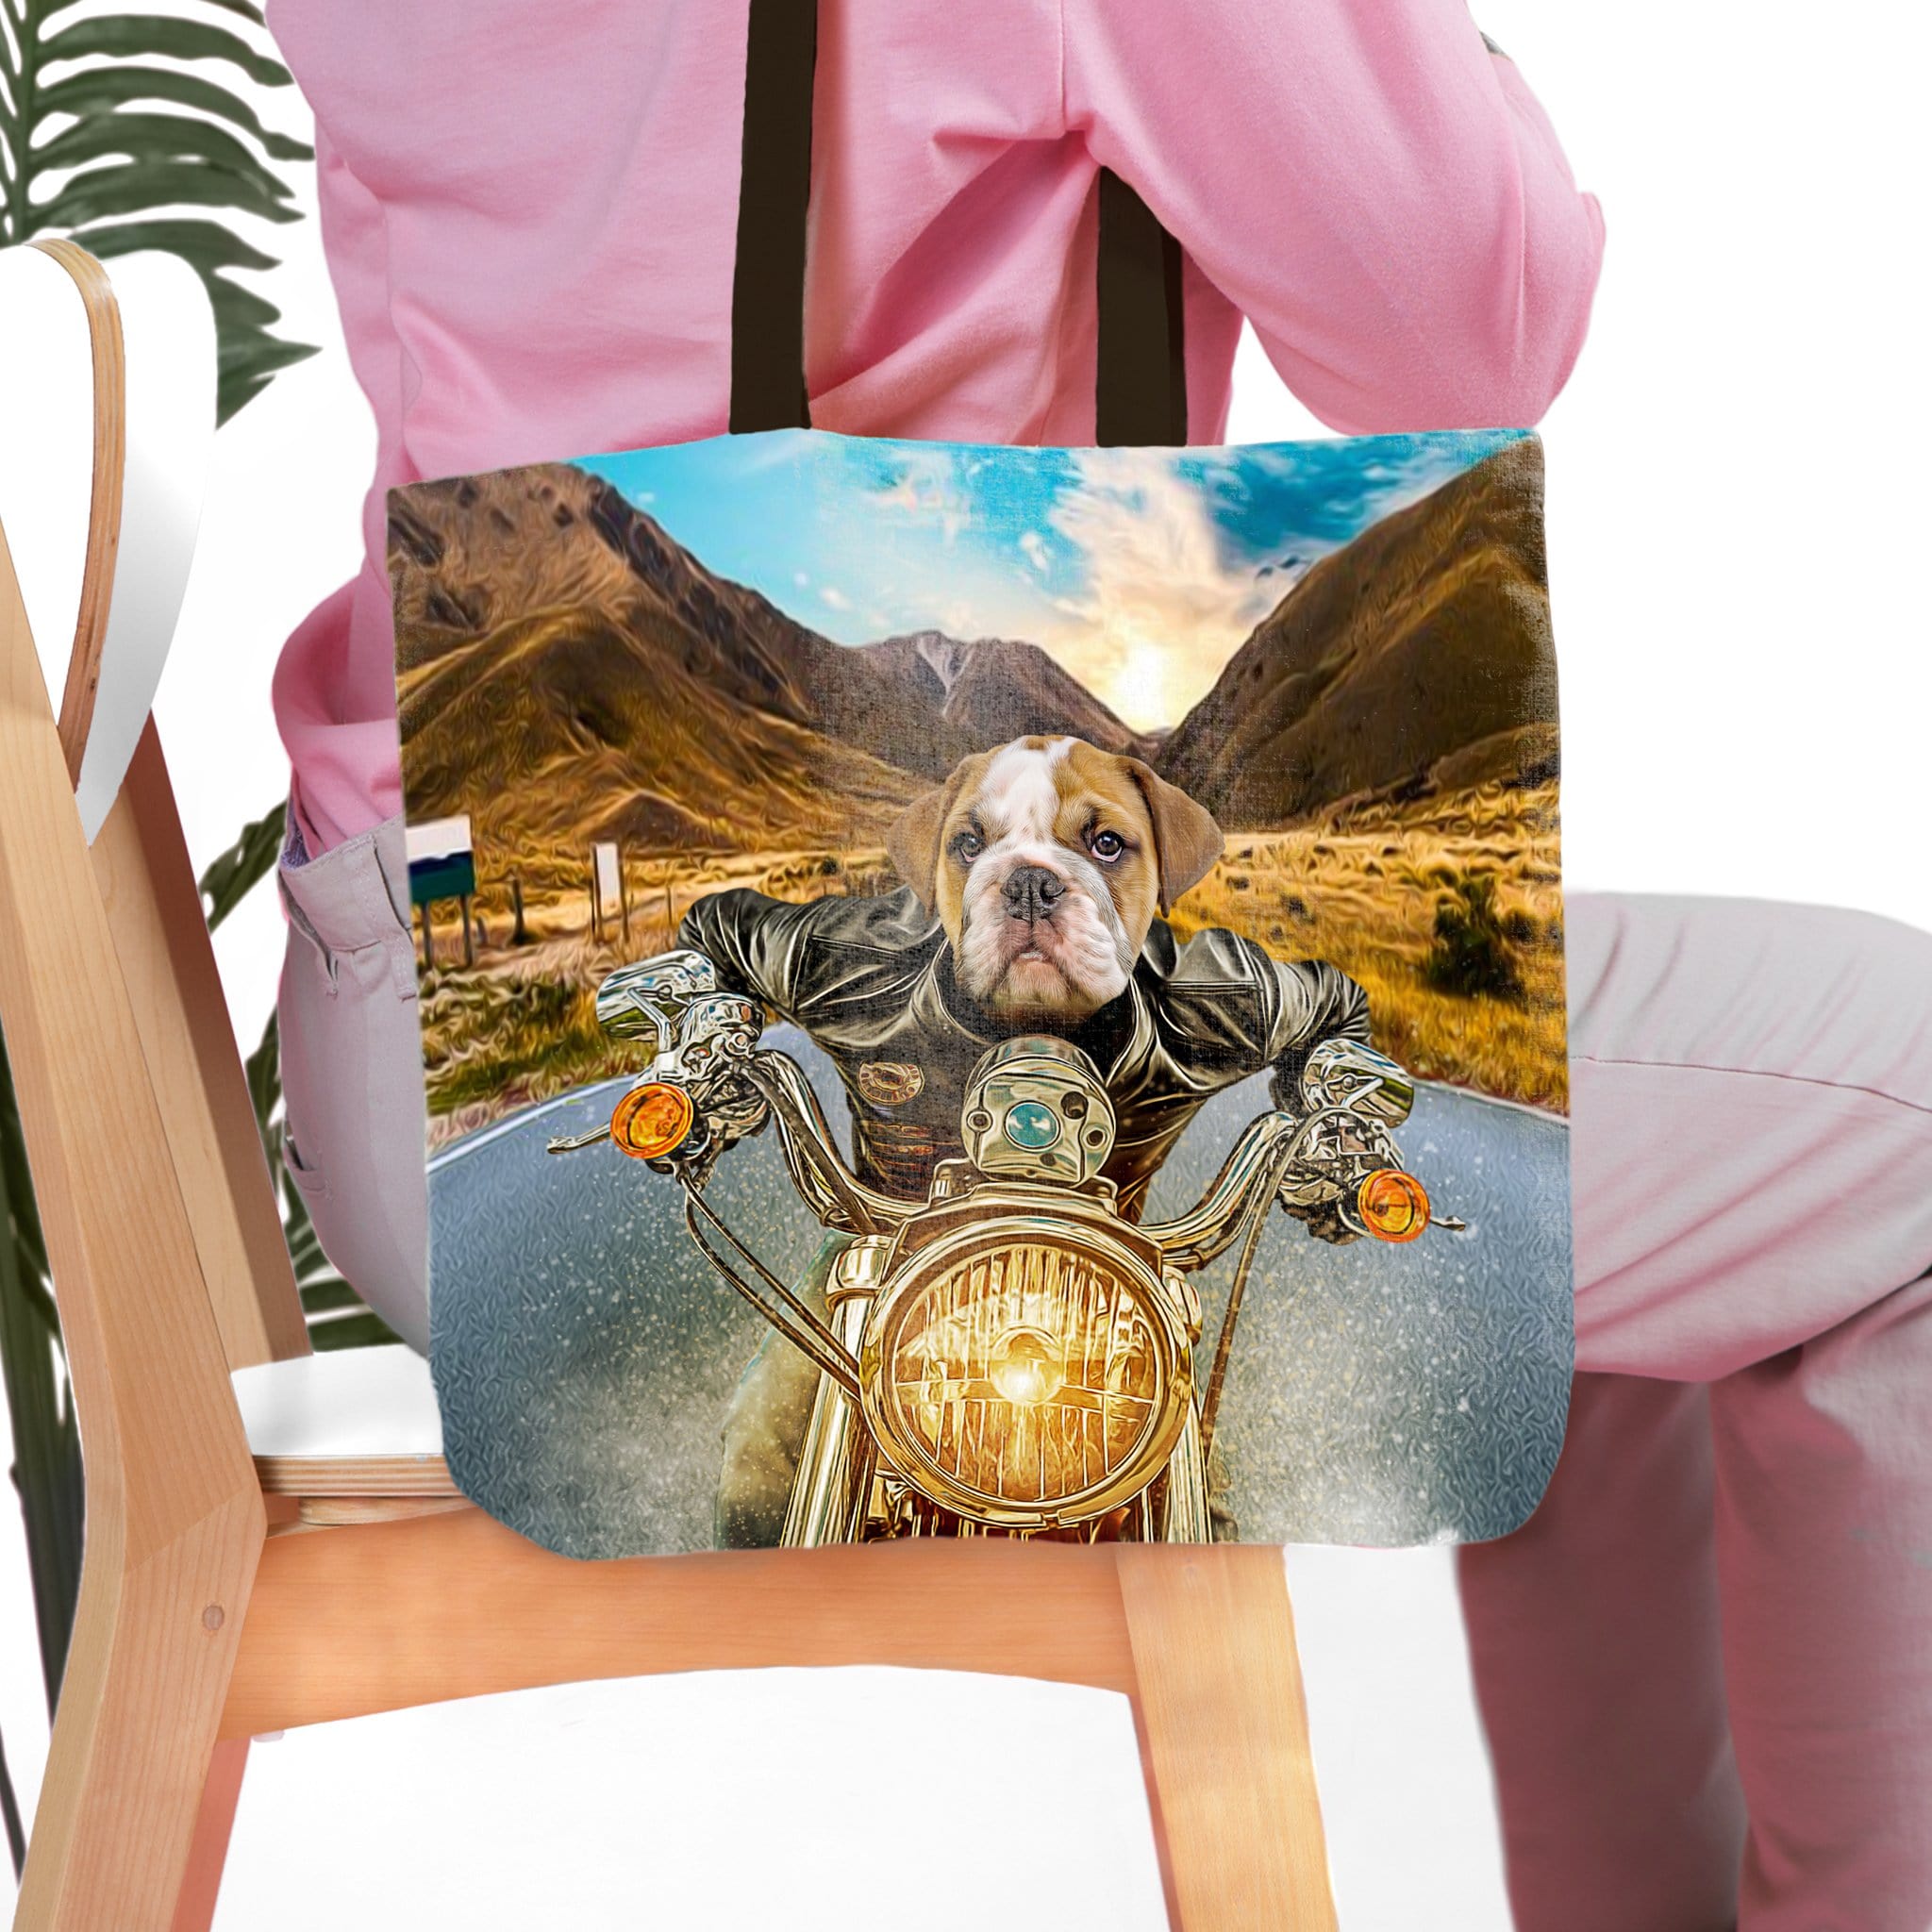 &#39;Harley Wooferson&#39; Personalized Tote Bag